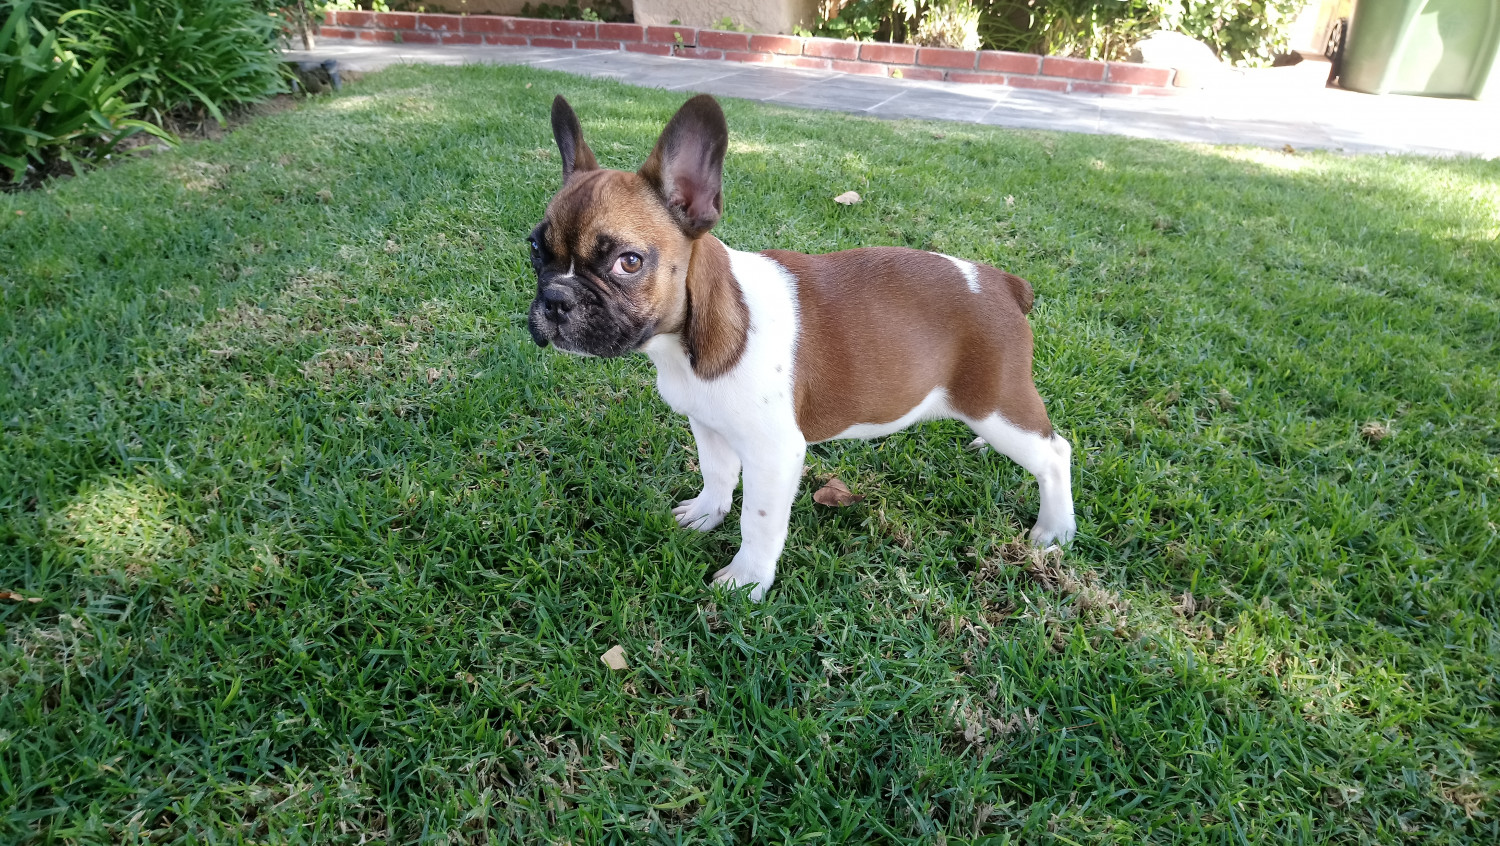 60 HQ Images French Bulldogs For Sale In Nc : French Bulldog Puppies for Sale in San Luis Obispo, CA